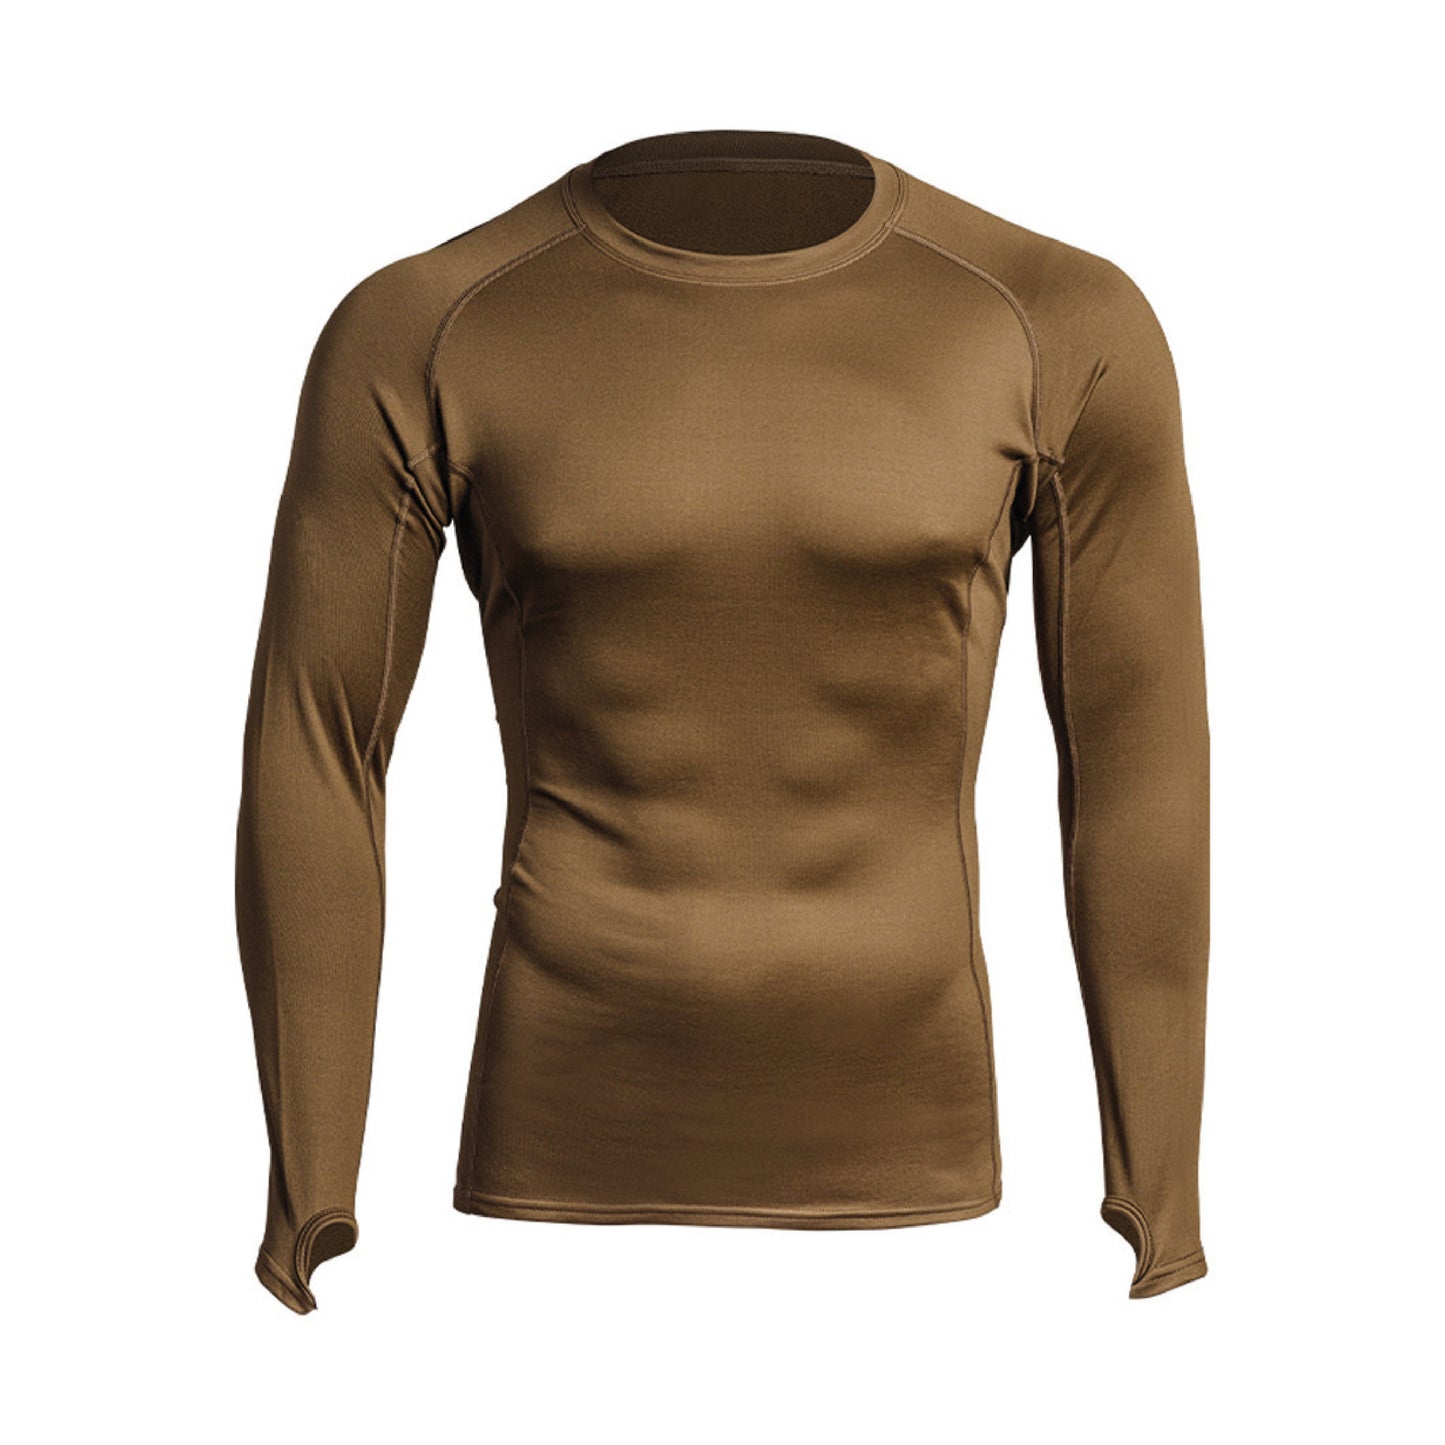 A10 Thermo Performer longsleeve coyote